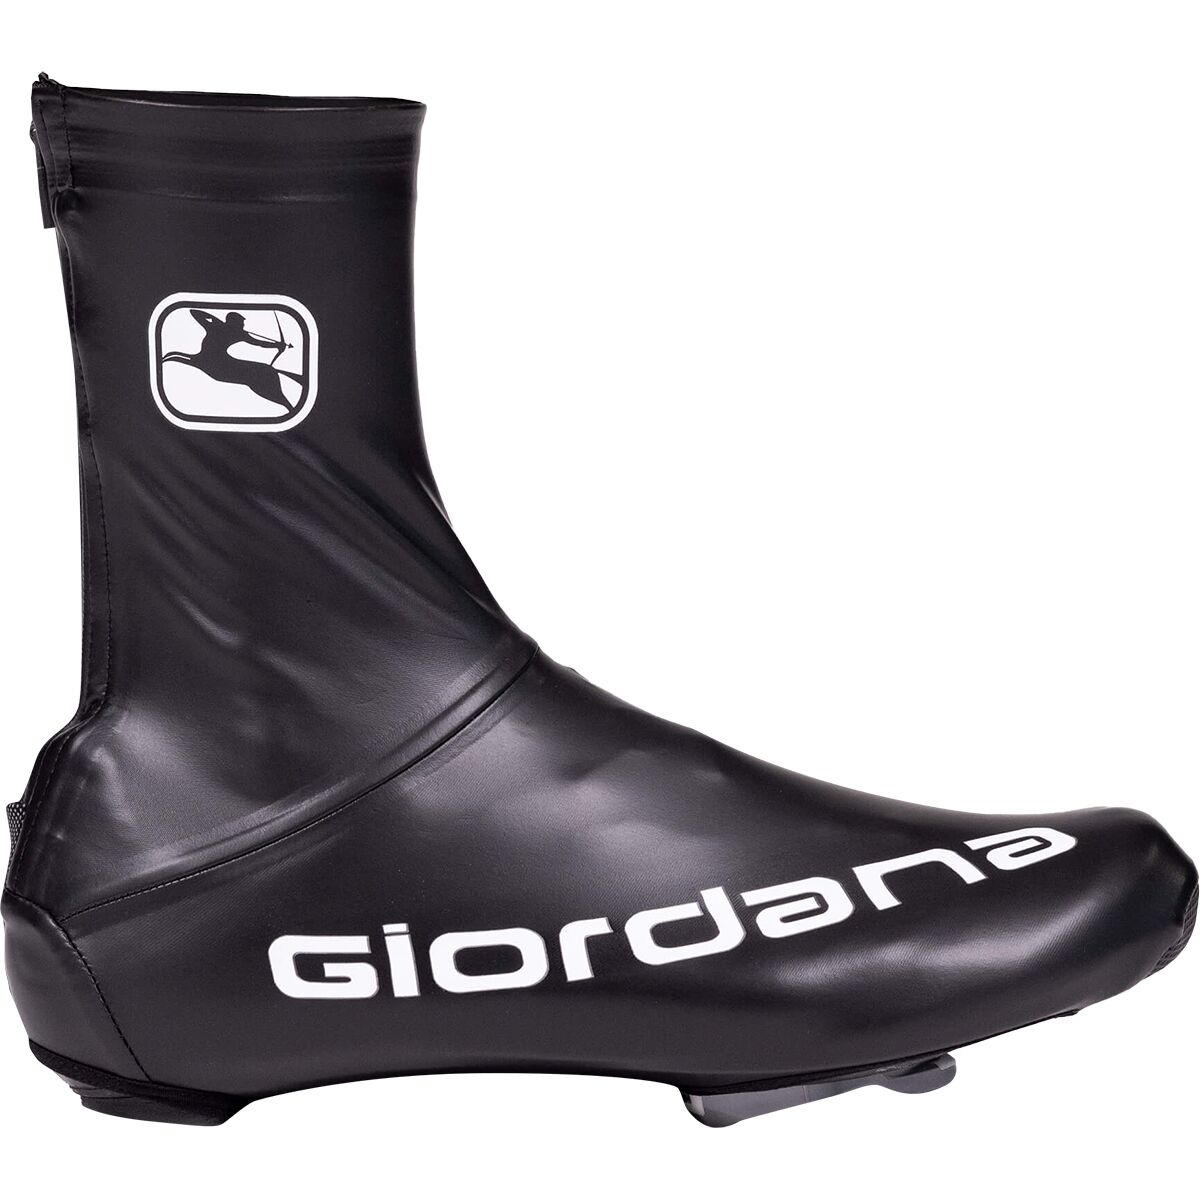 Giordana Water Proof Shoe Cover